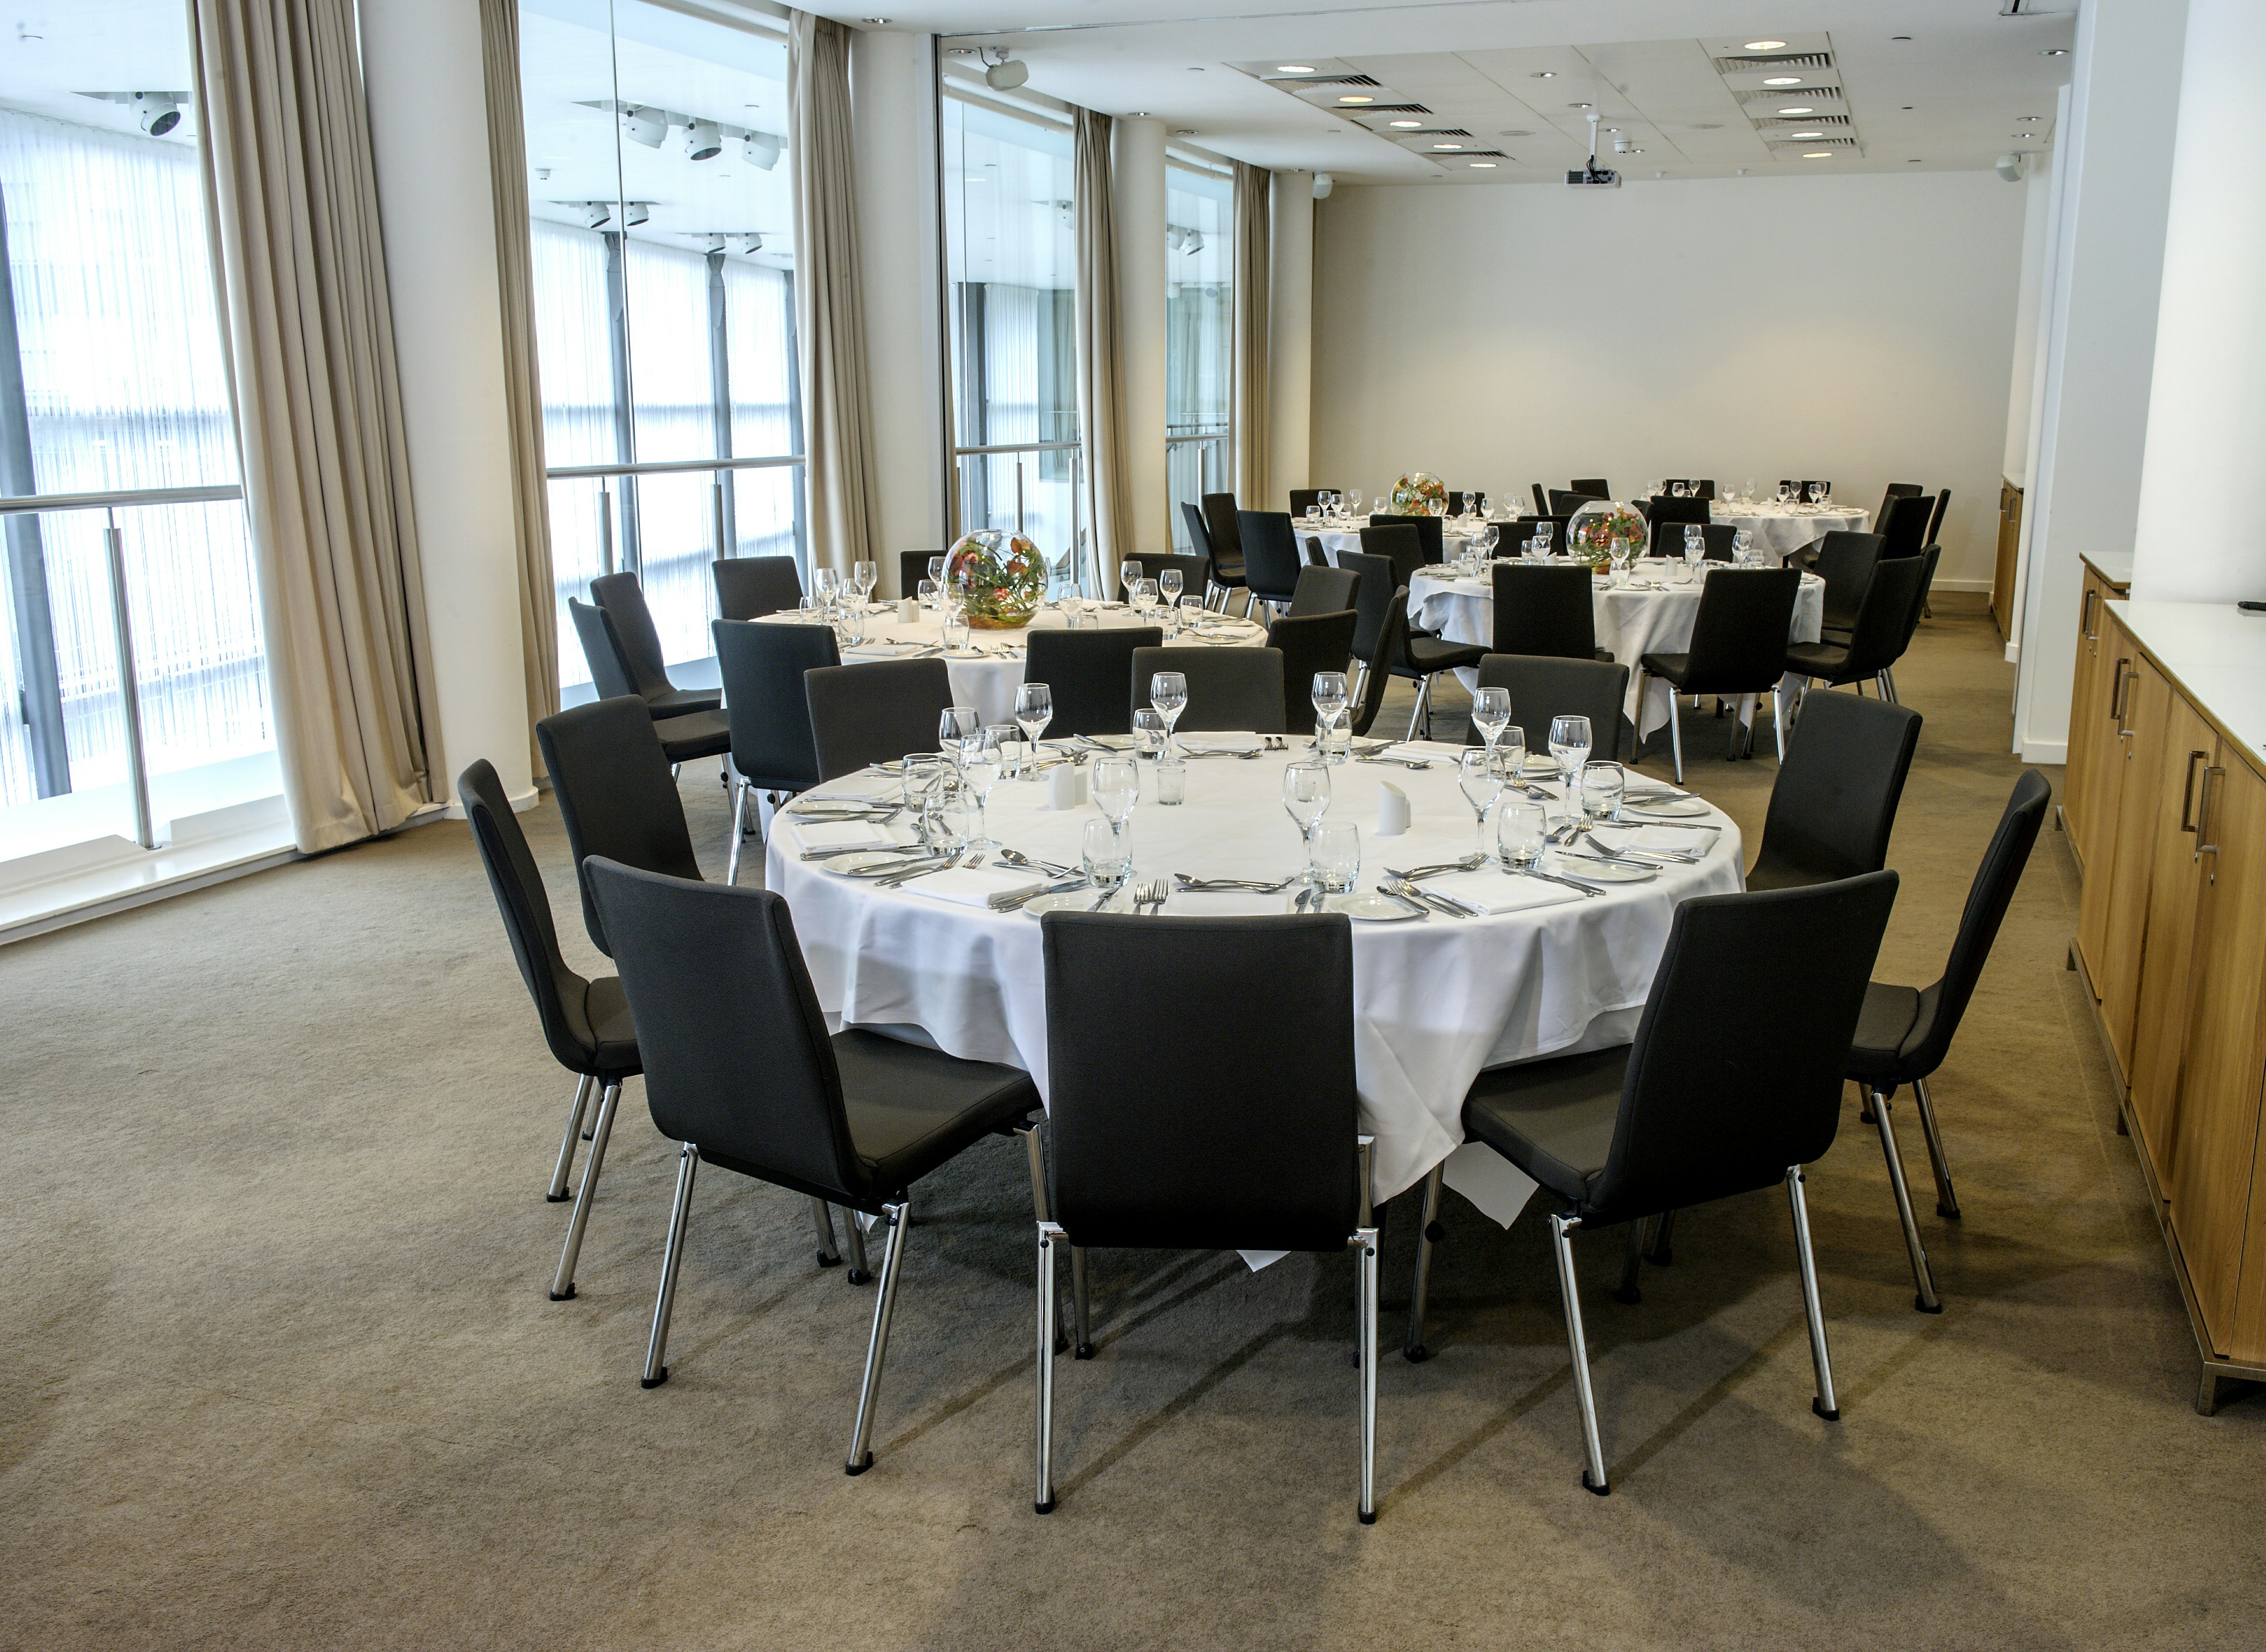 Gala Dinner Venues in Manchester - DoubleTree by Hilton Manchester